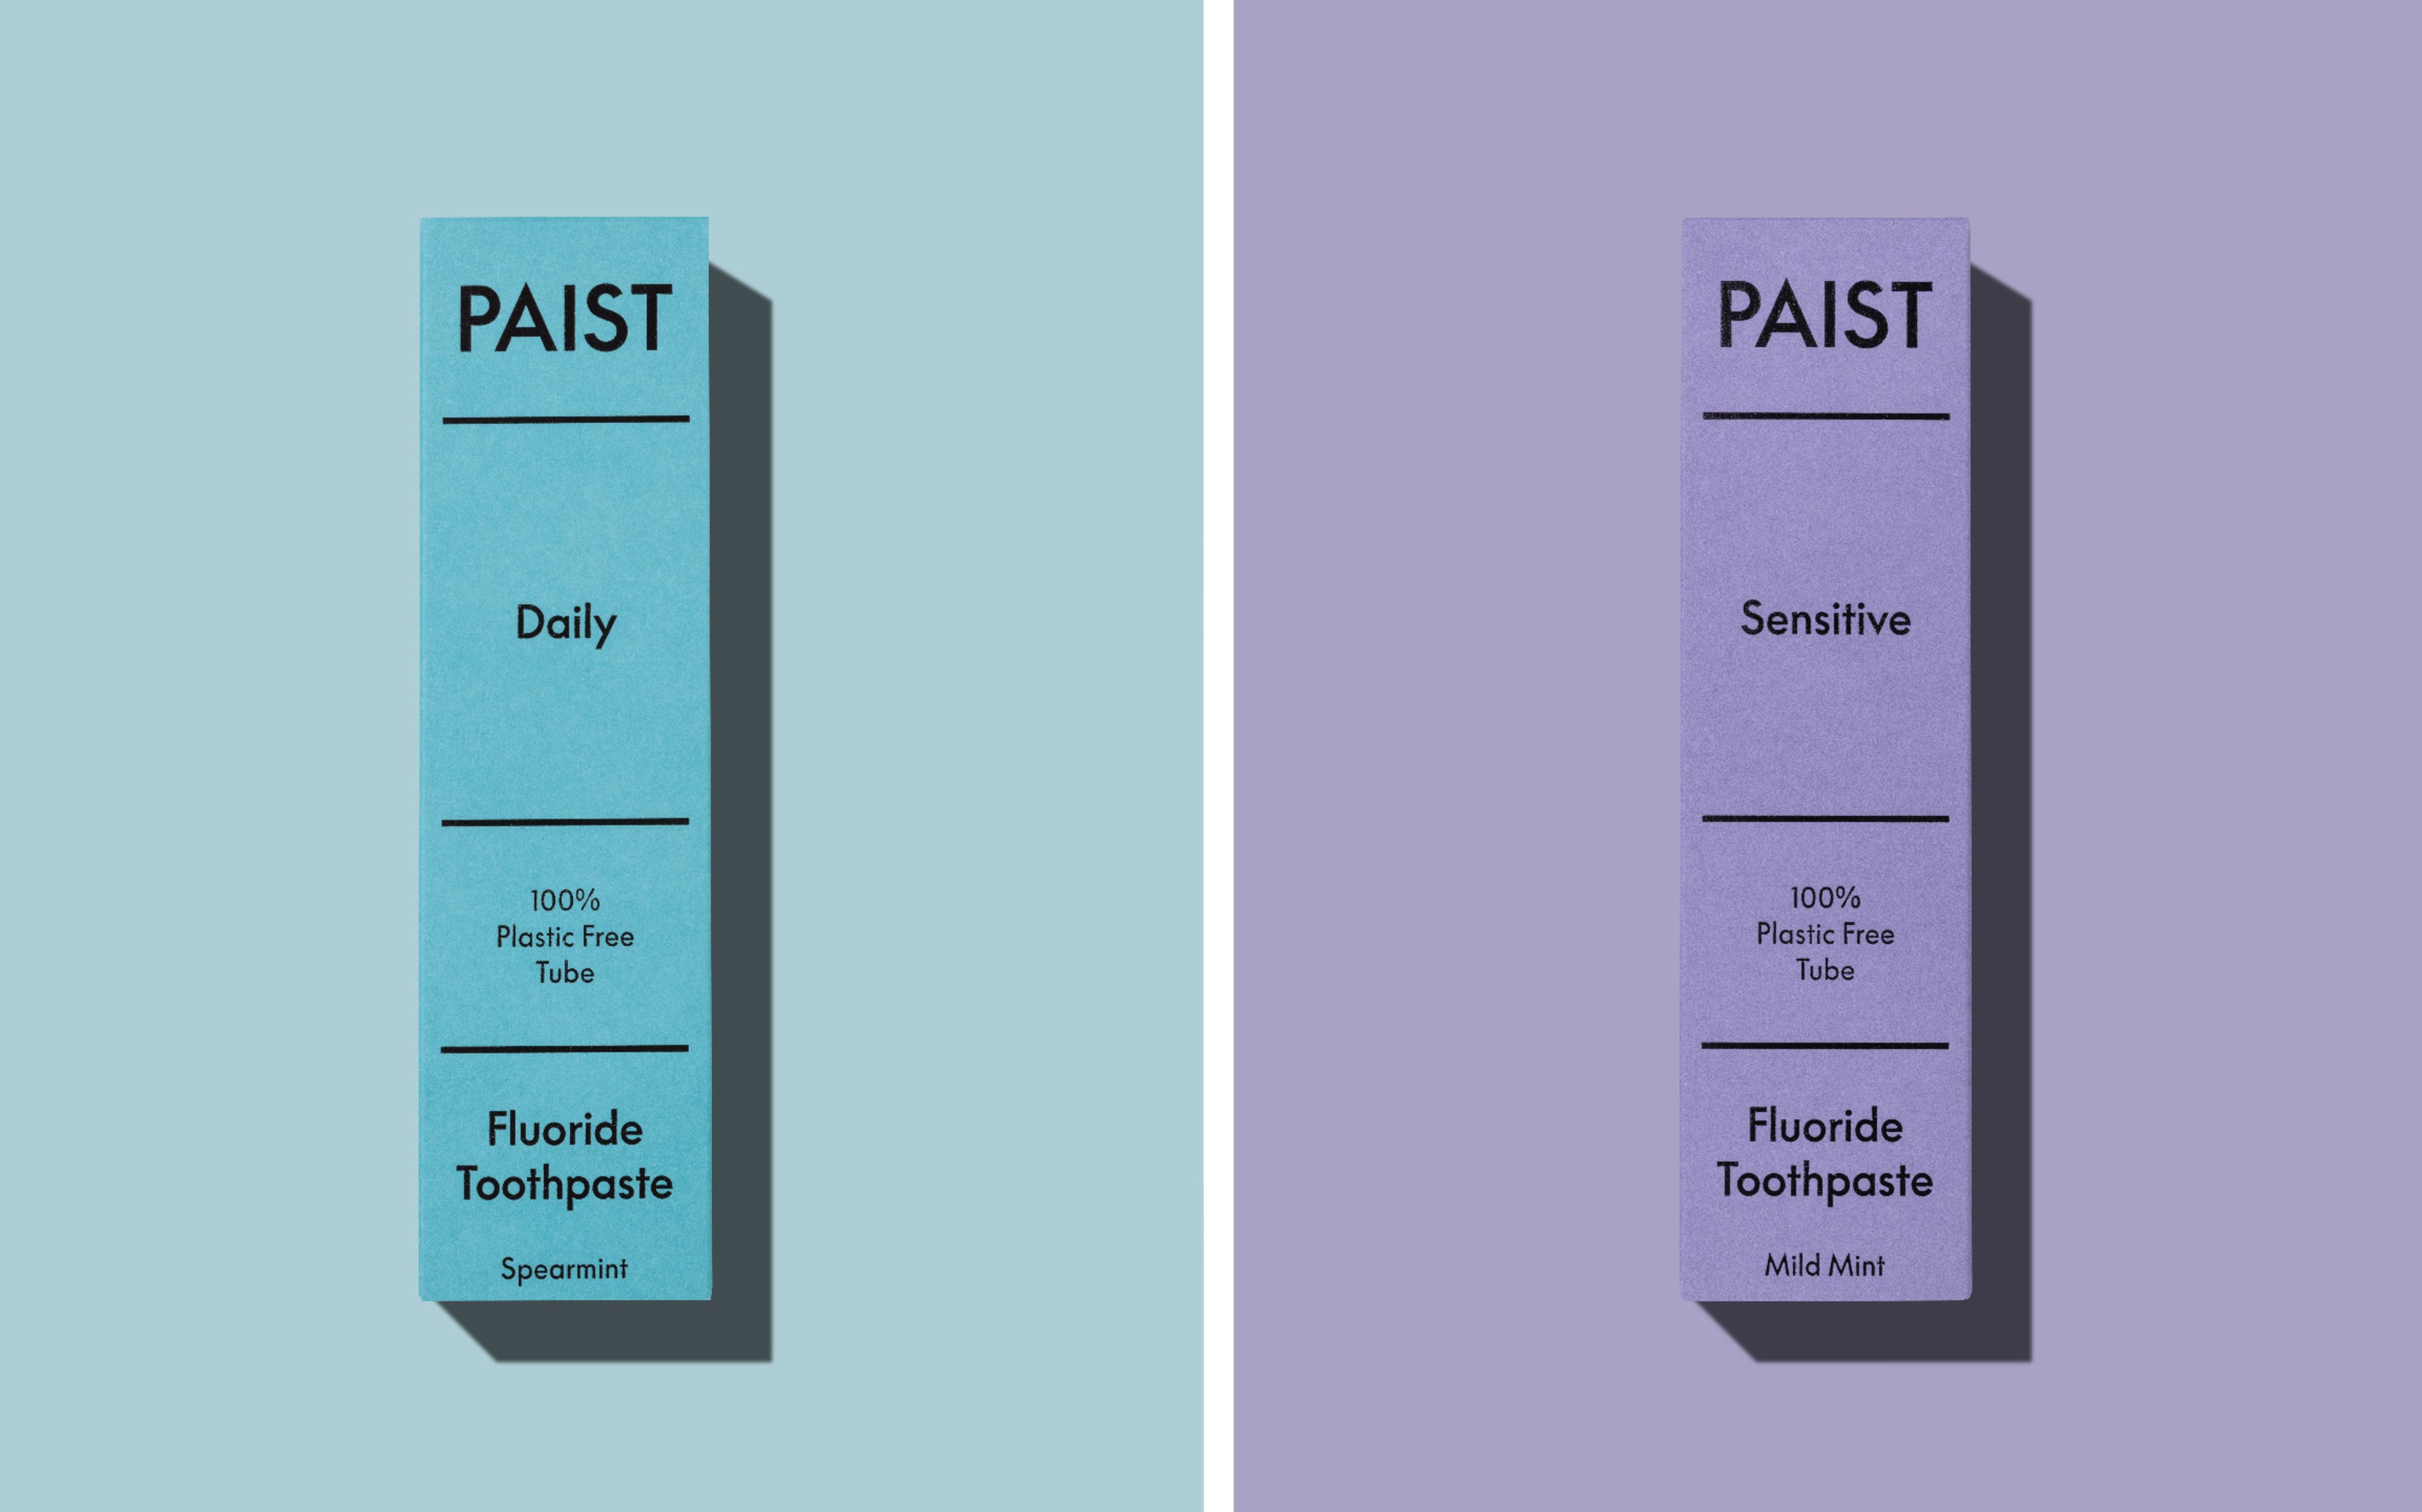 Branding, packaging, motion graphics and website for disruptive toothpaste brand PAIST designed by Two Times Elliott. 